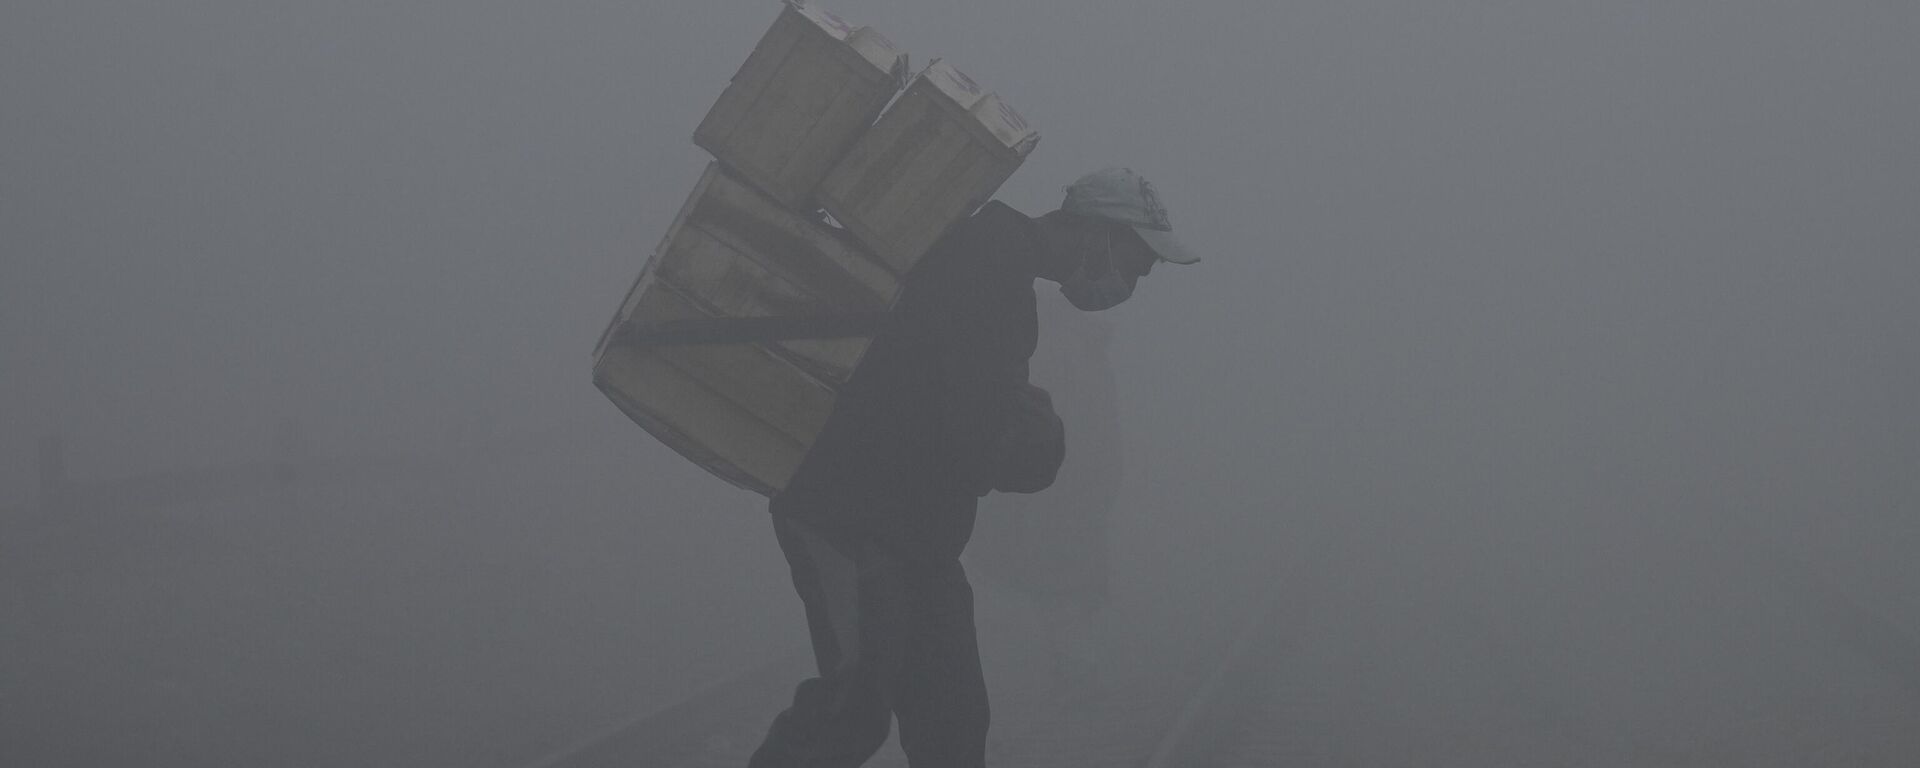 A labourer carries fruit boxes amid smoggy and foggy conditions early in the morning in Lahore on January 3, 2023. - Sputnik India, 1920, 13.03.2023